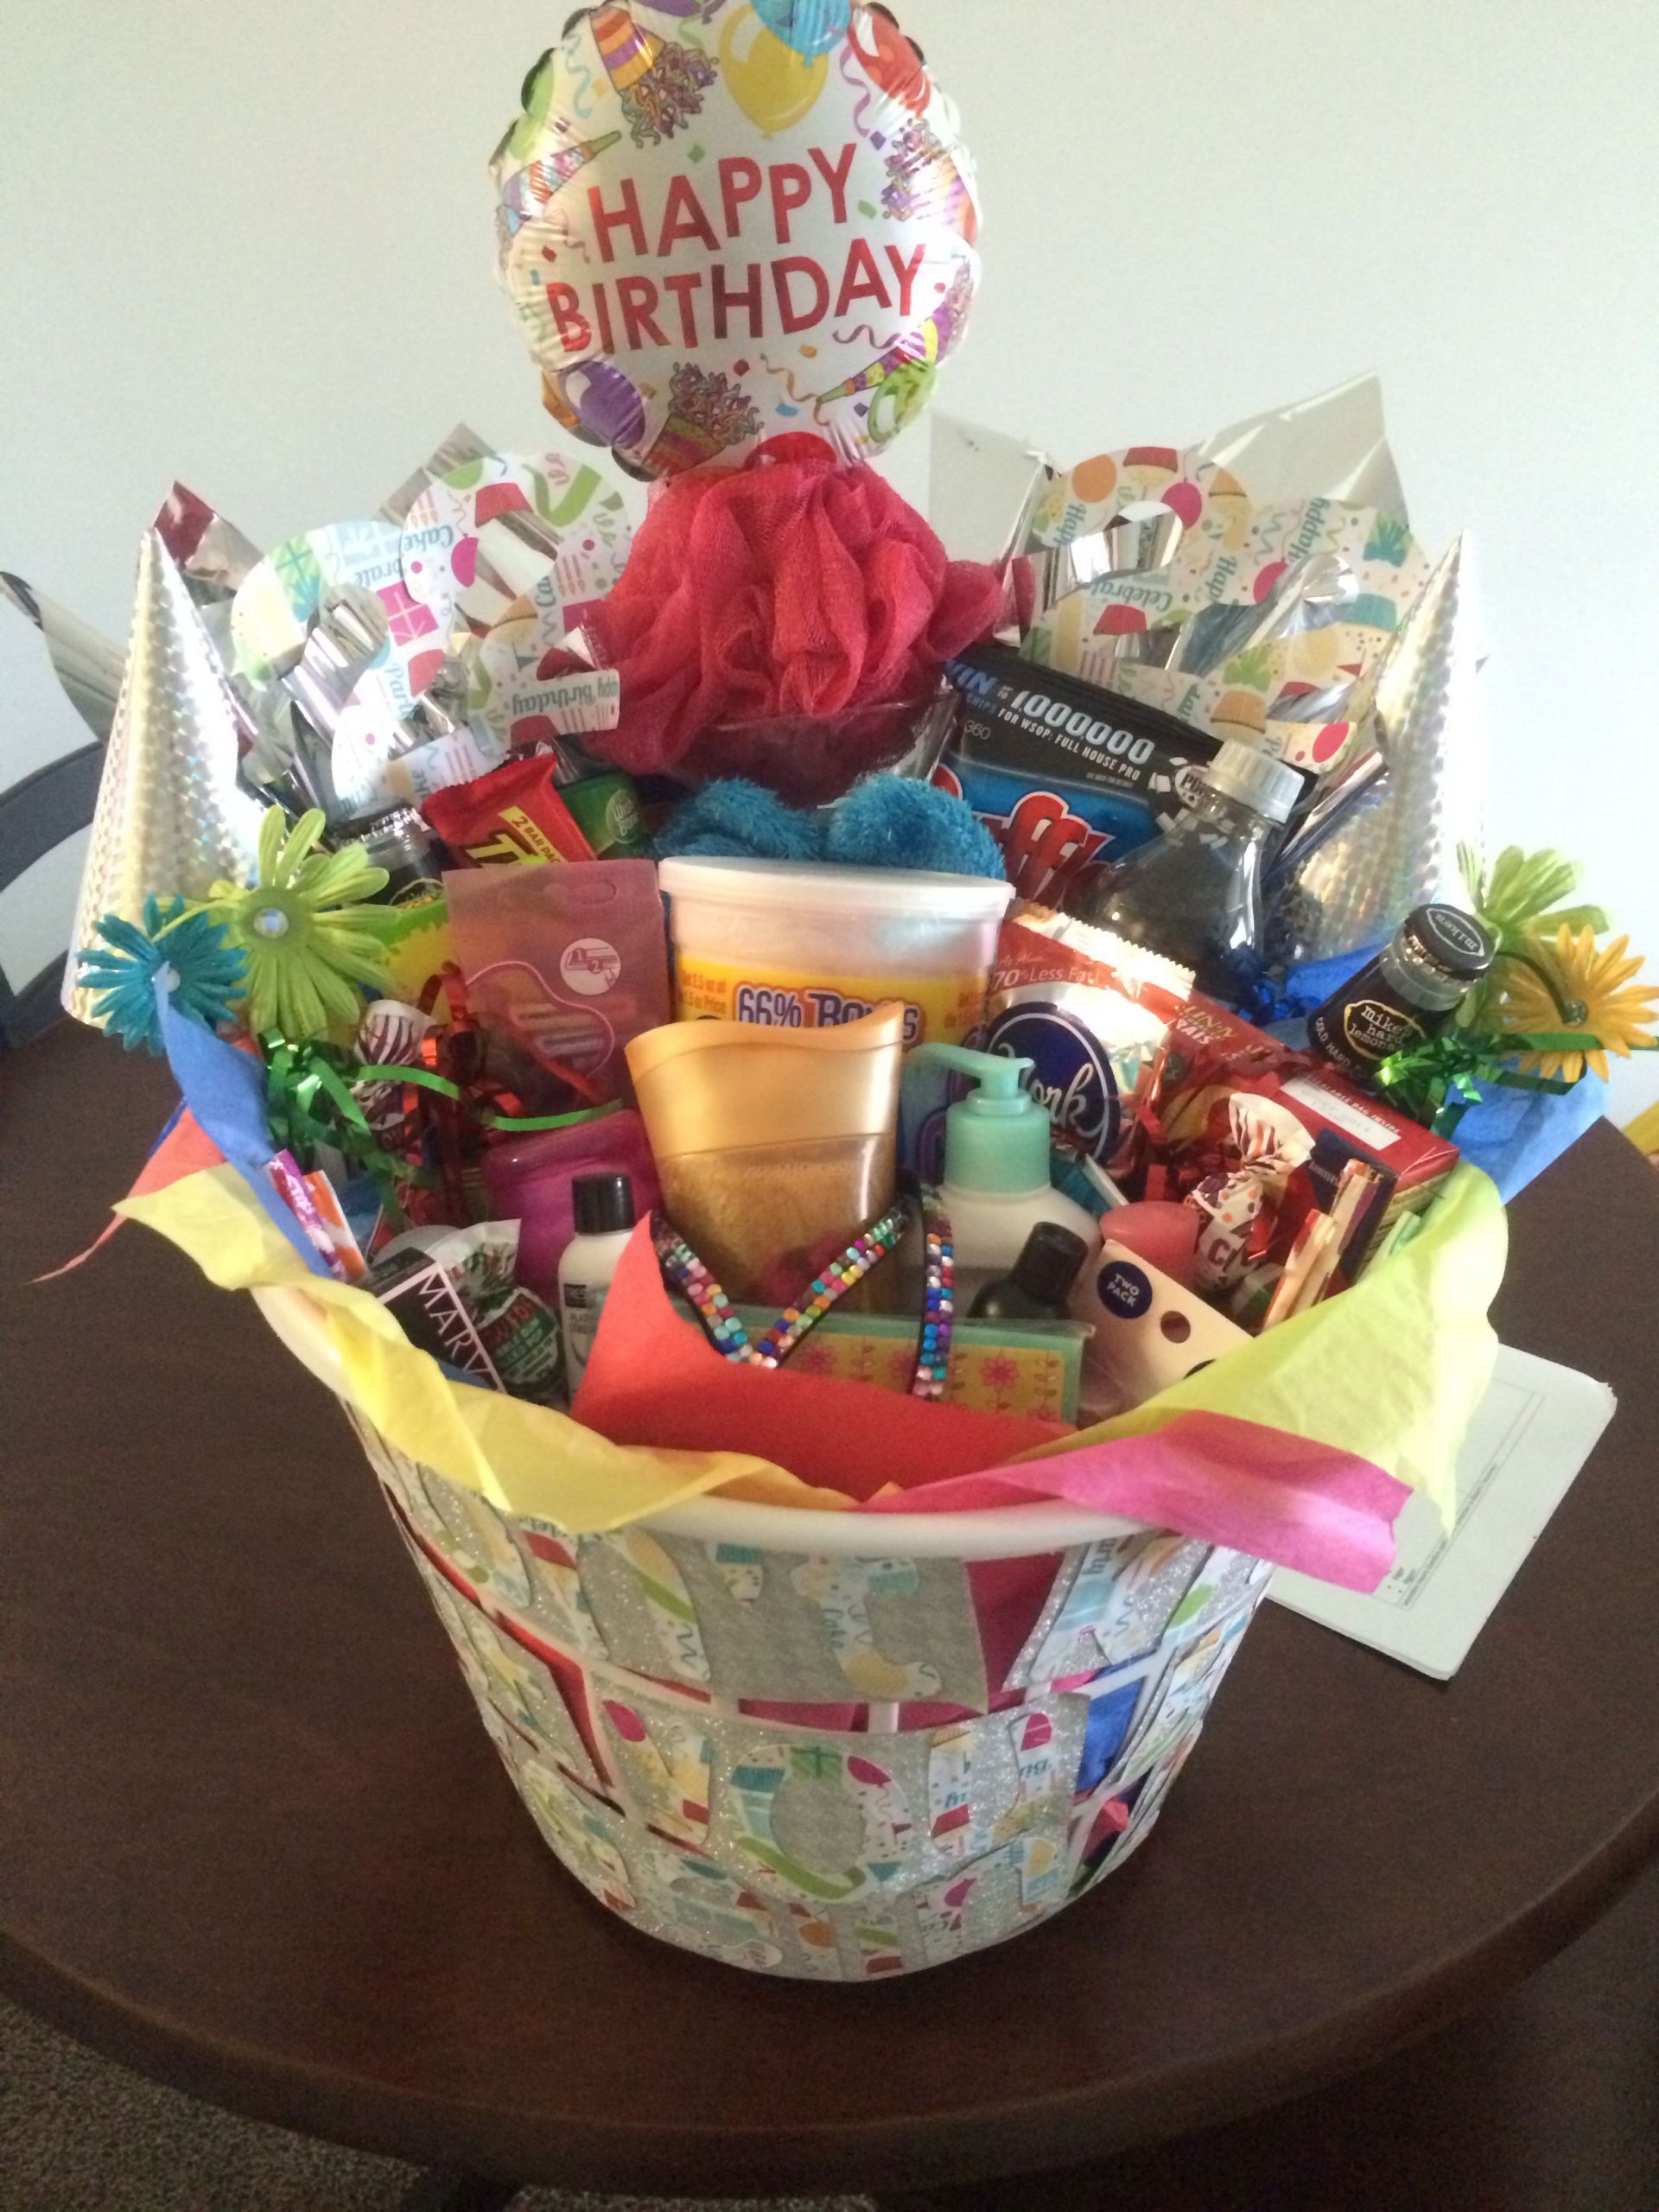 The Best Gift Baskets Birthday Home, Family, Style and Art Ideas